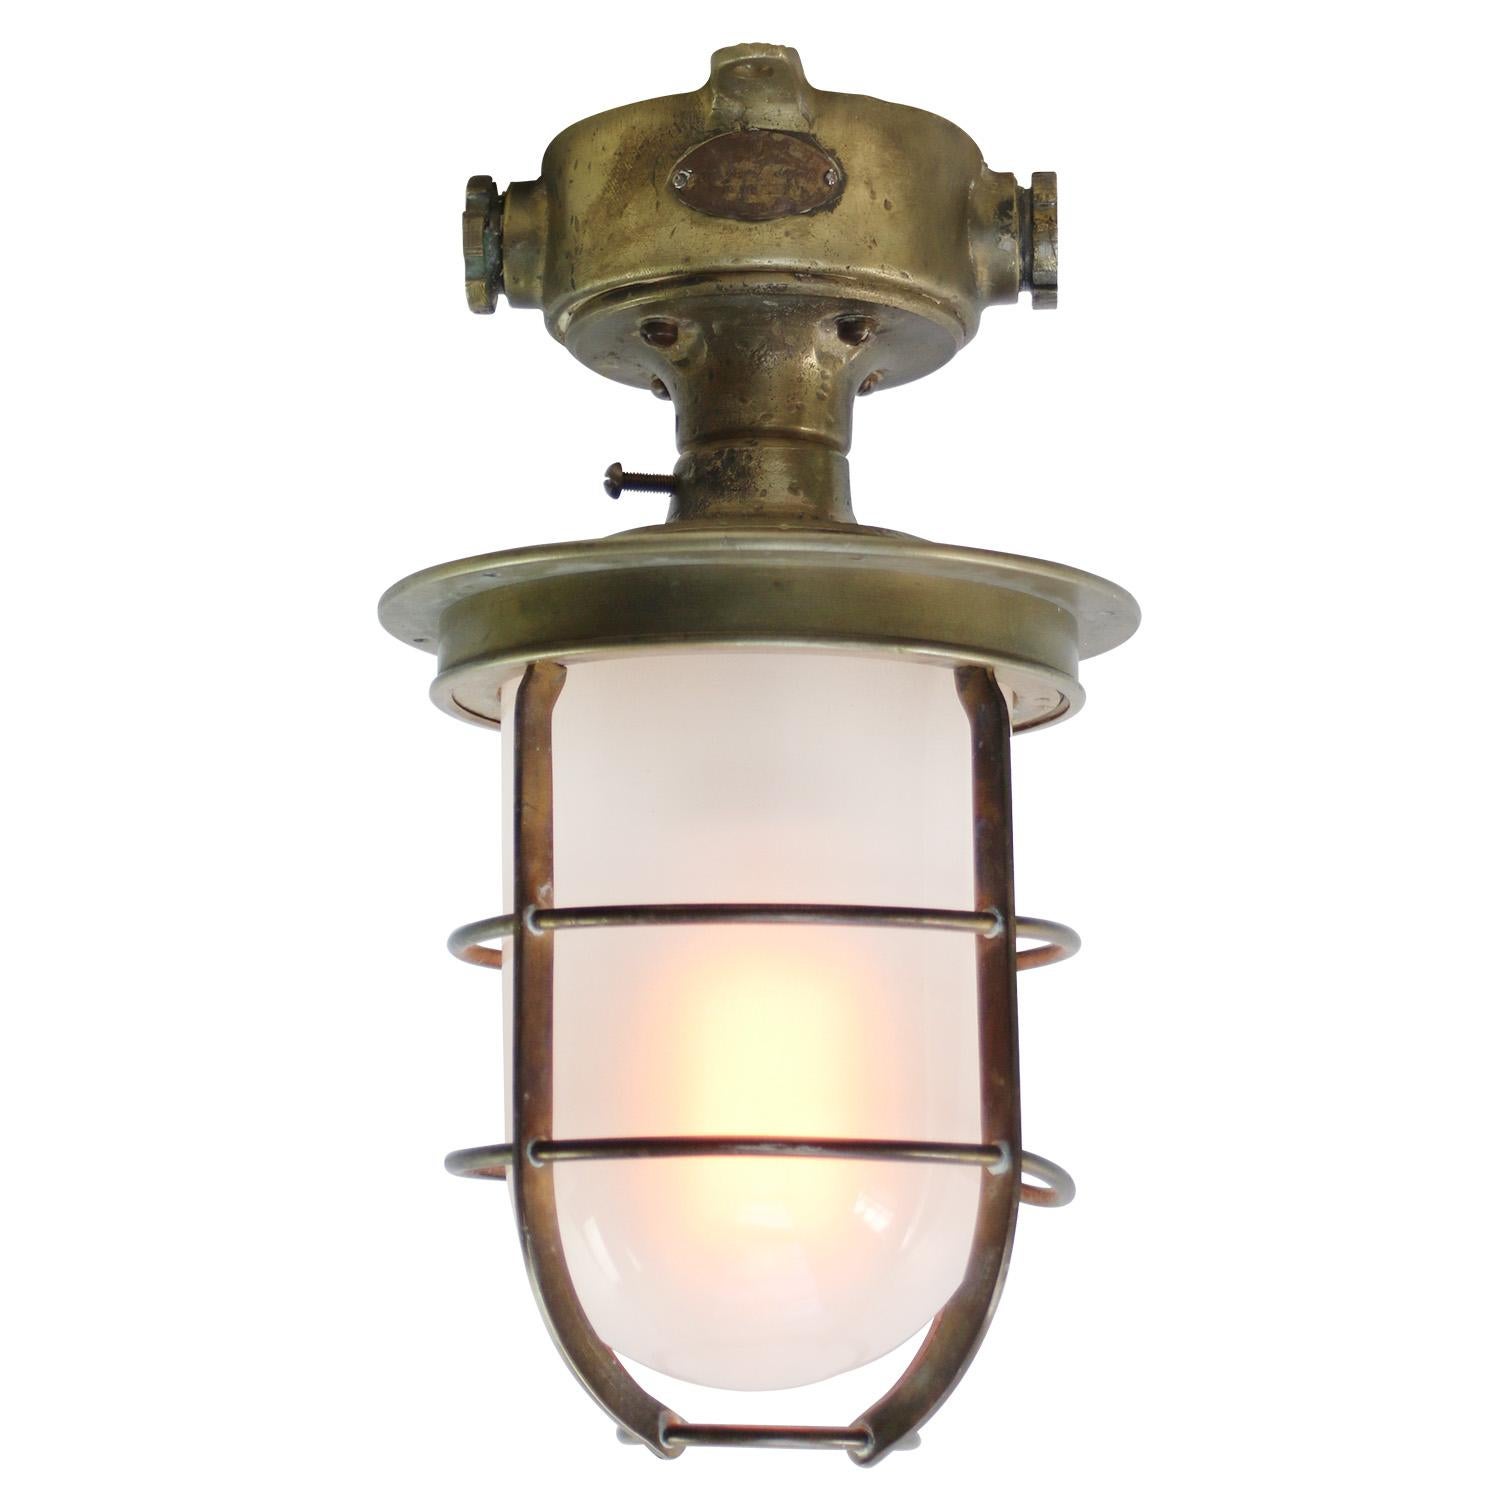 French brass machinist ship flush mount, ceiling light
Opaline glass

Diameter base: 10.5 cm / 4”

Weight: 4.40 kg / 9.7 lb

Priced per individual item. All lamps have been made suitable by international standards for incandescent light bulbs,